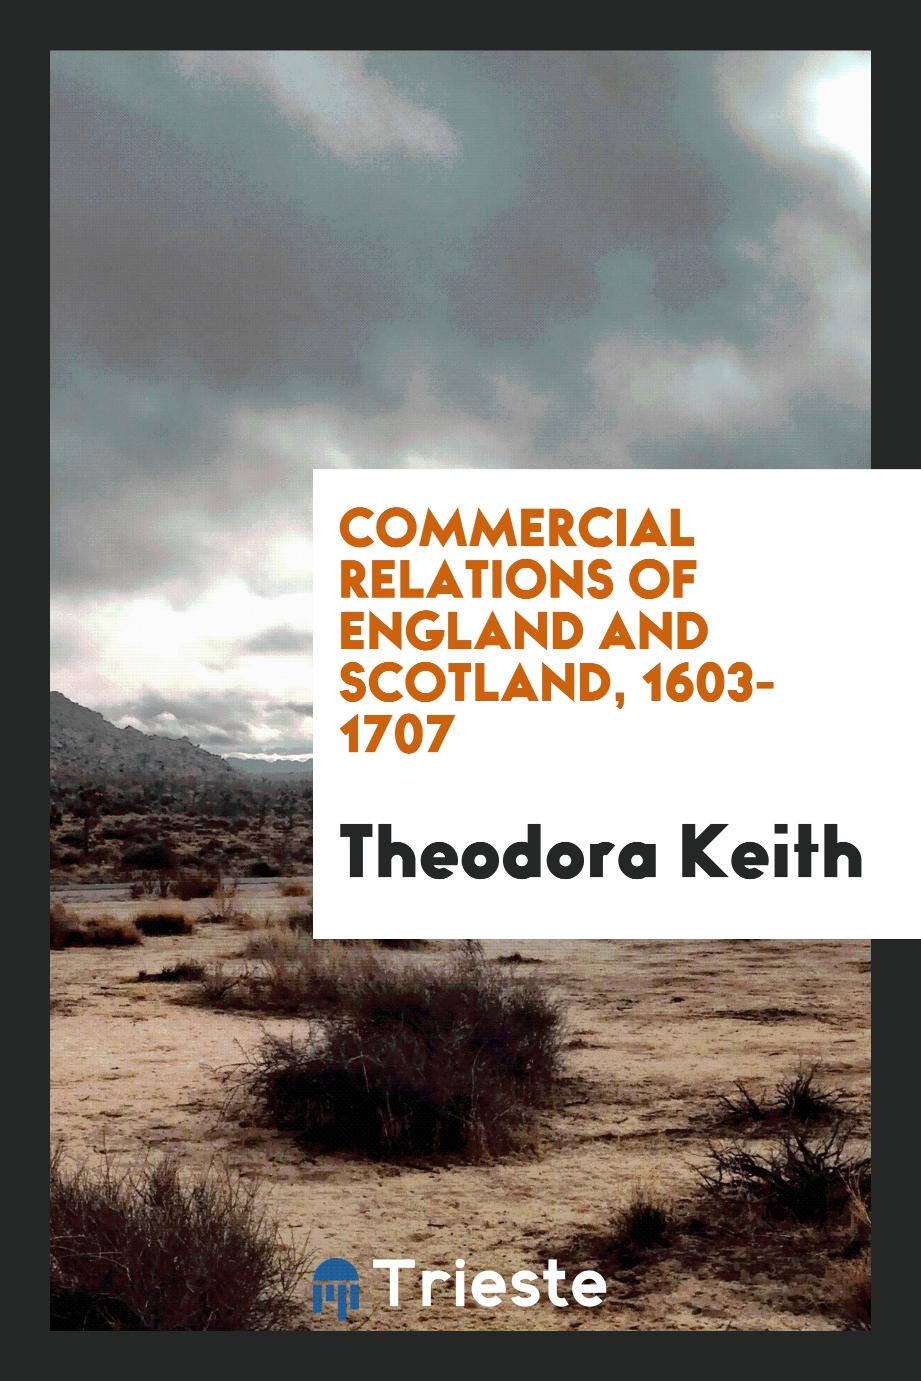 Commercial relations of England and Scotland, 1603-1707